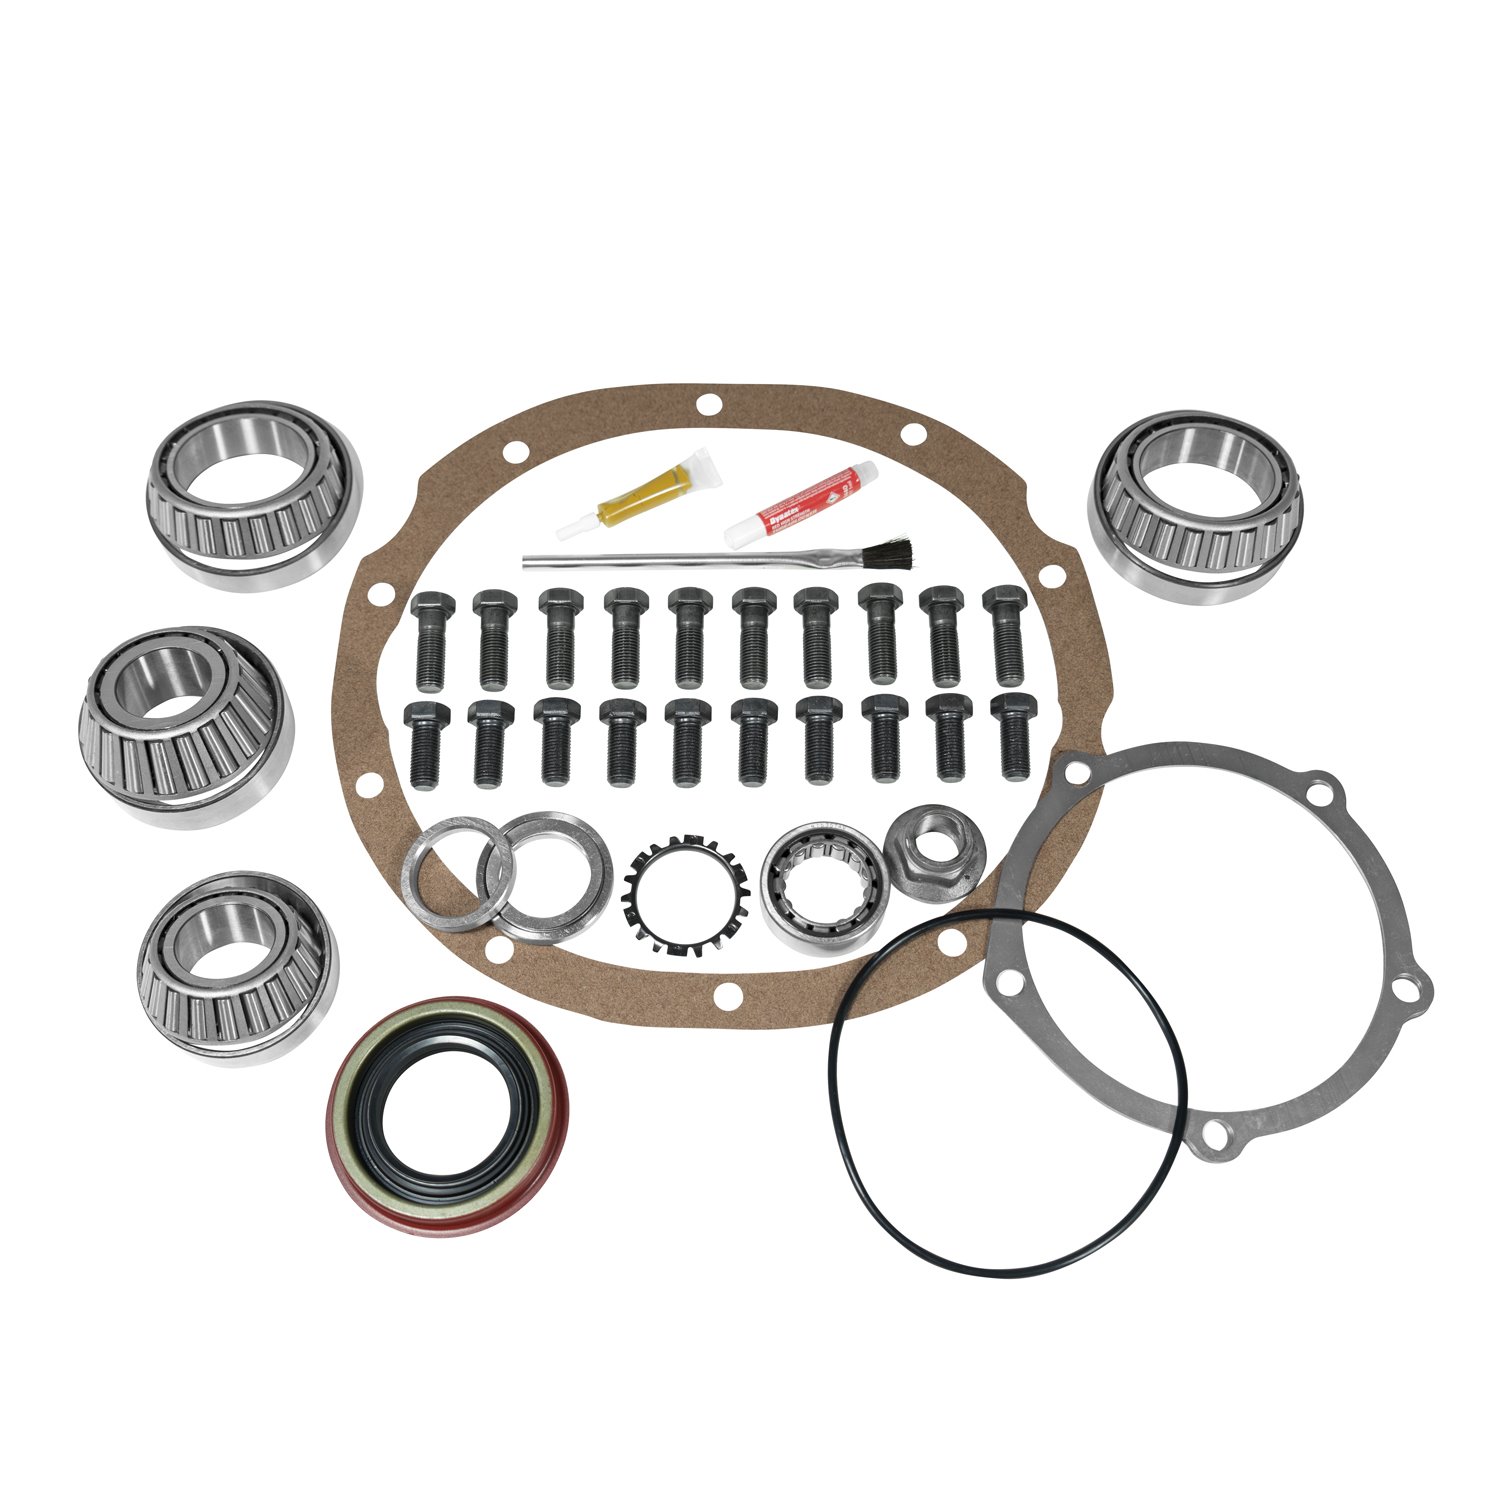 Master Overhaul Kit For Ford 9 in. Lm603011 Differential